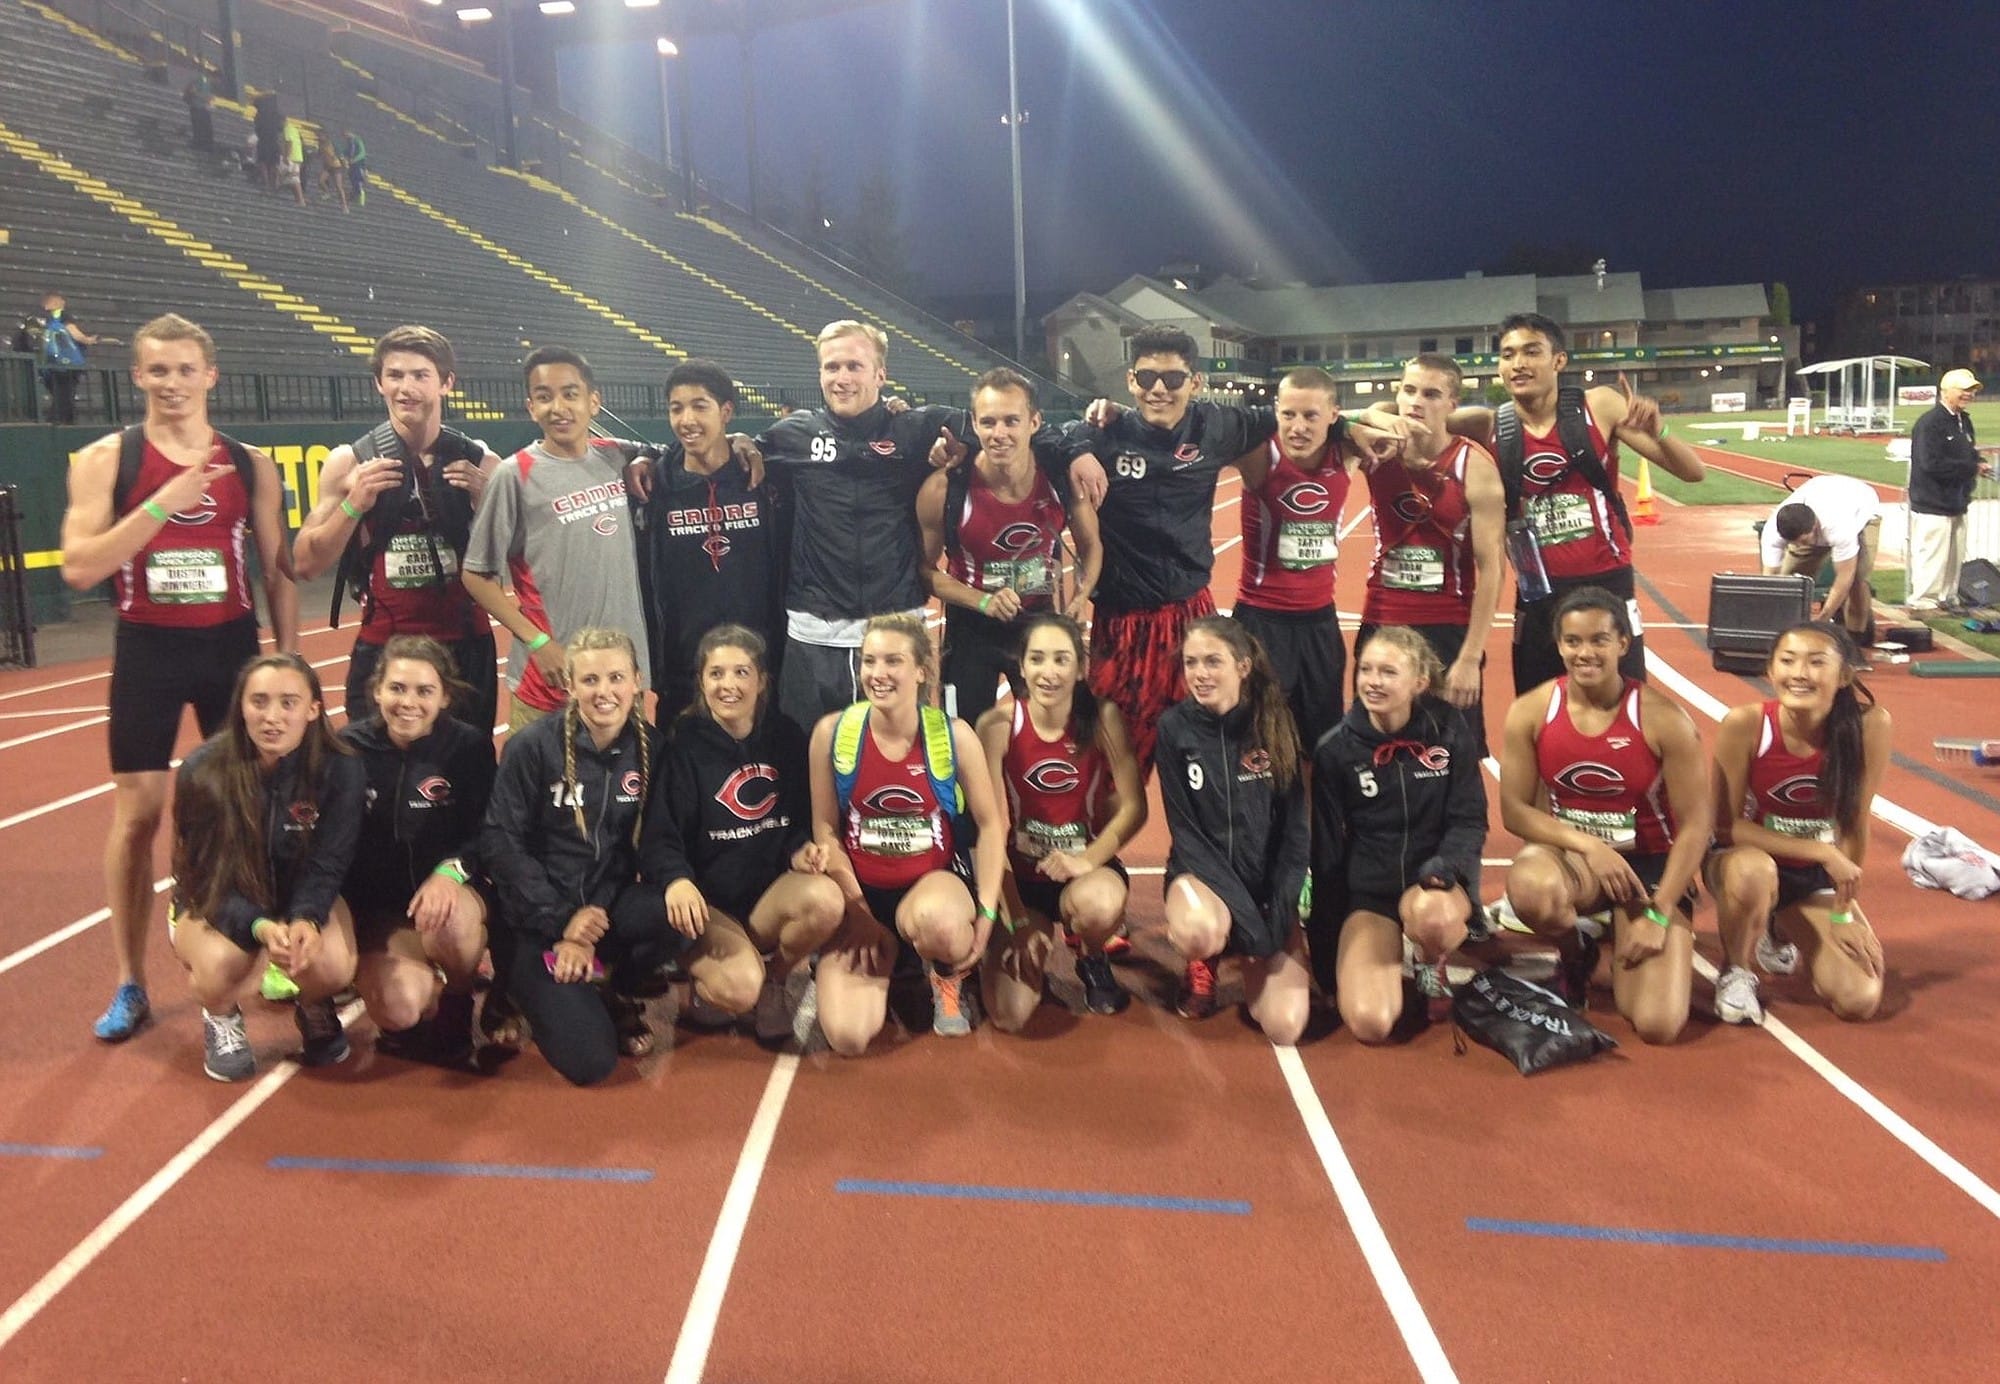 The Camas High School track and field team celebrates winning the high school team title at the Oregon Relays on Saturday in Eugene, Ore.